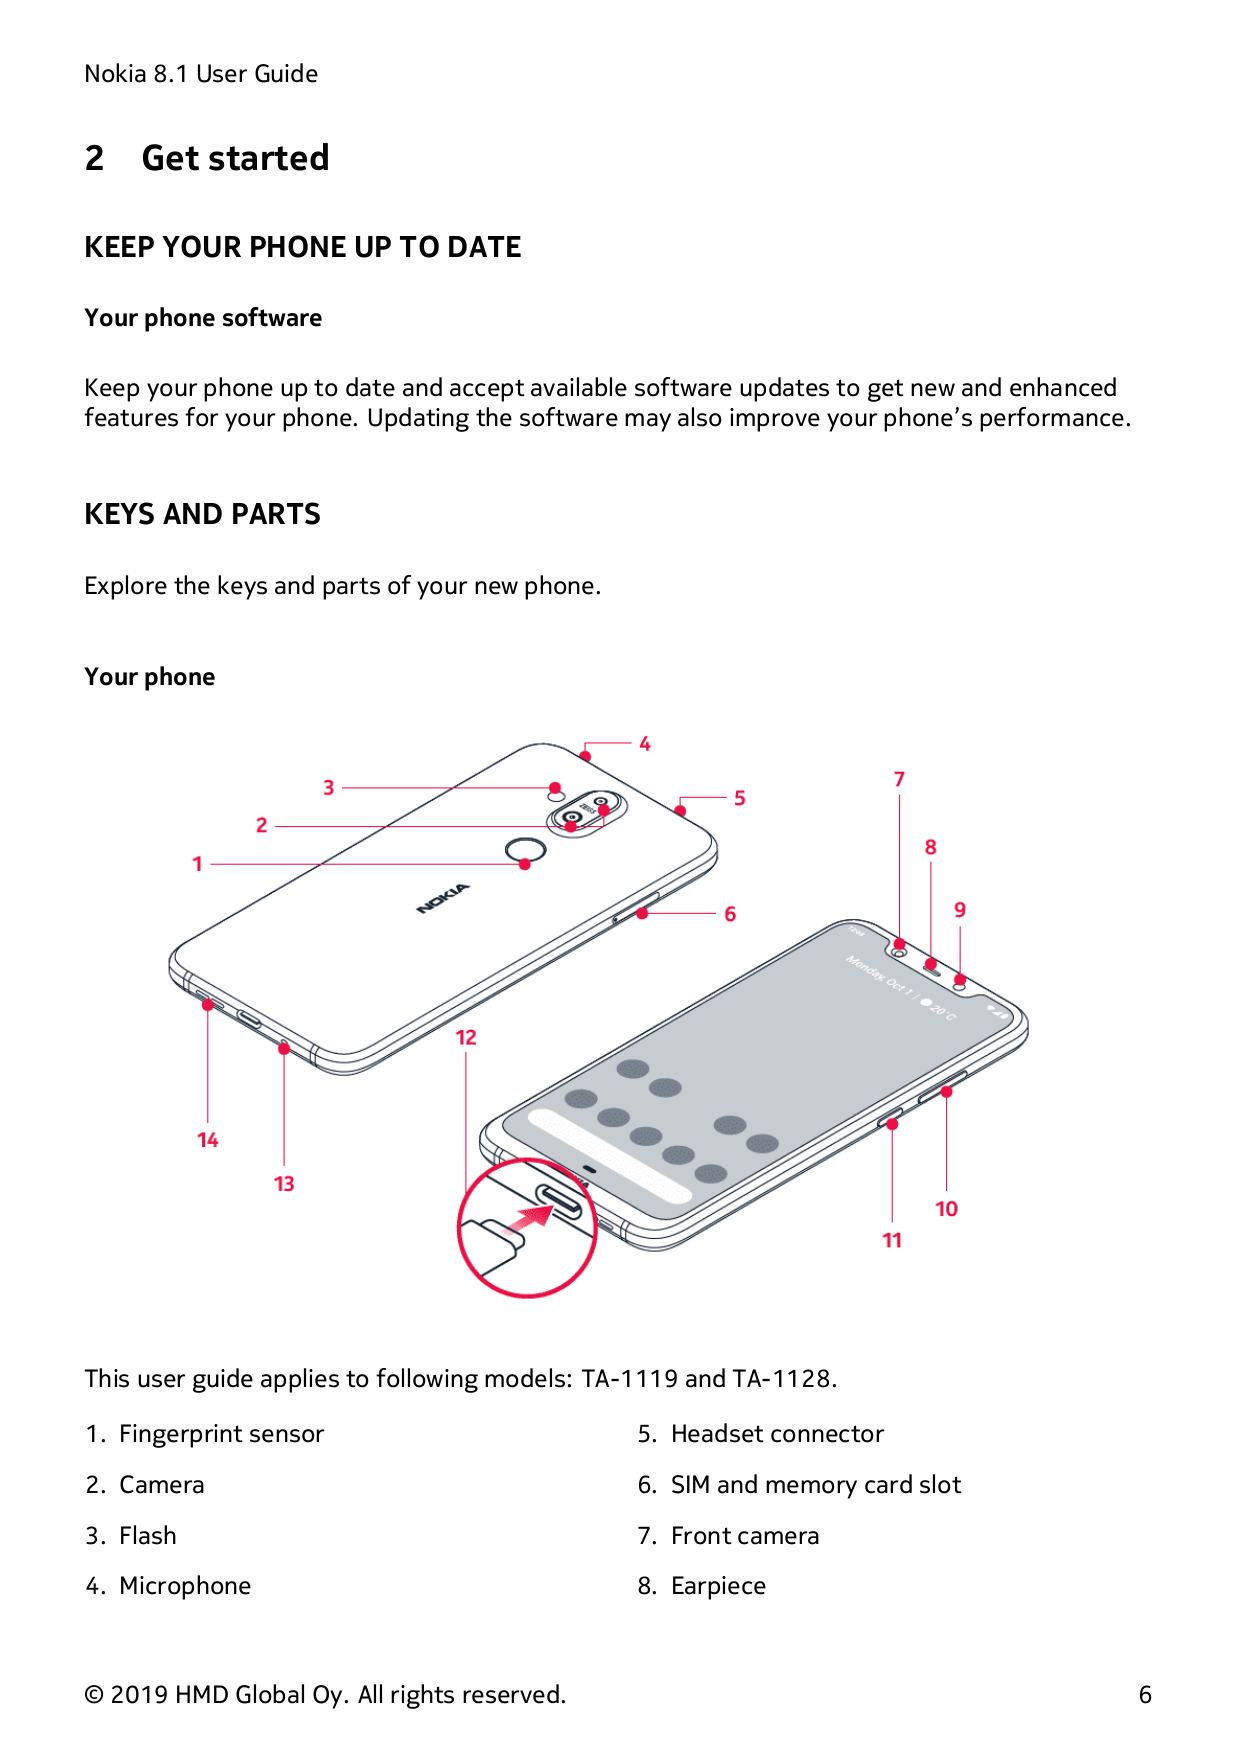 Nokia 8.1 User Guide2Get startedKEEP YOUR PHONE UP TO DATEYour phone softwareKeep your phone up to date and accept available sof